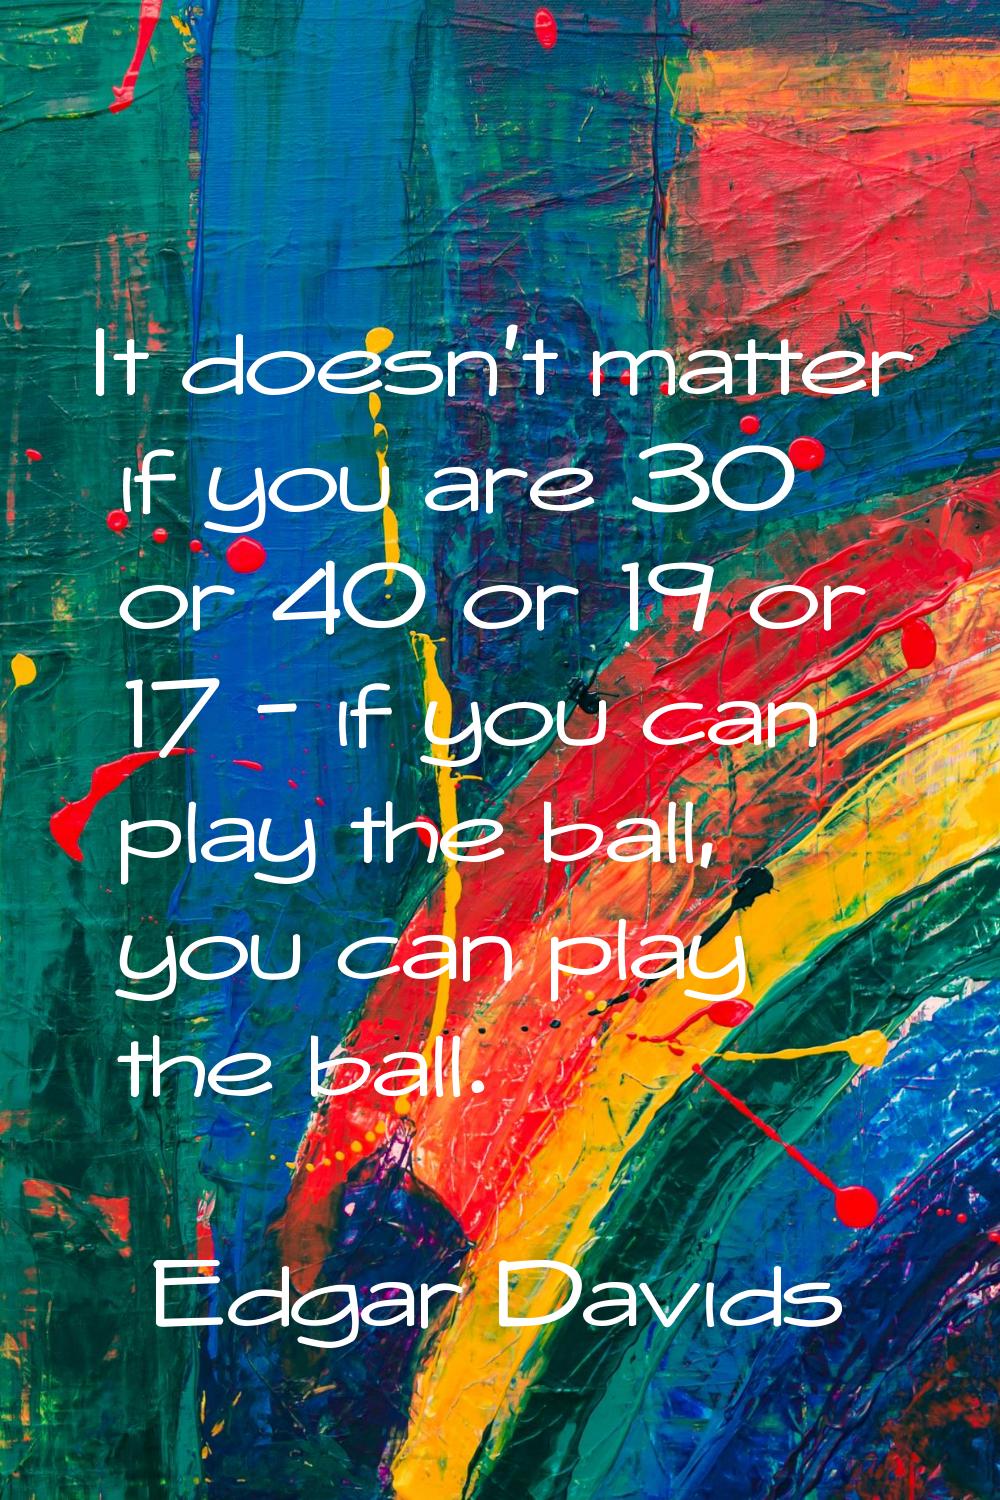 It doesn't matter if you are 30 or 40 or 19 or 17 - if you can play the ball, you can play the ball